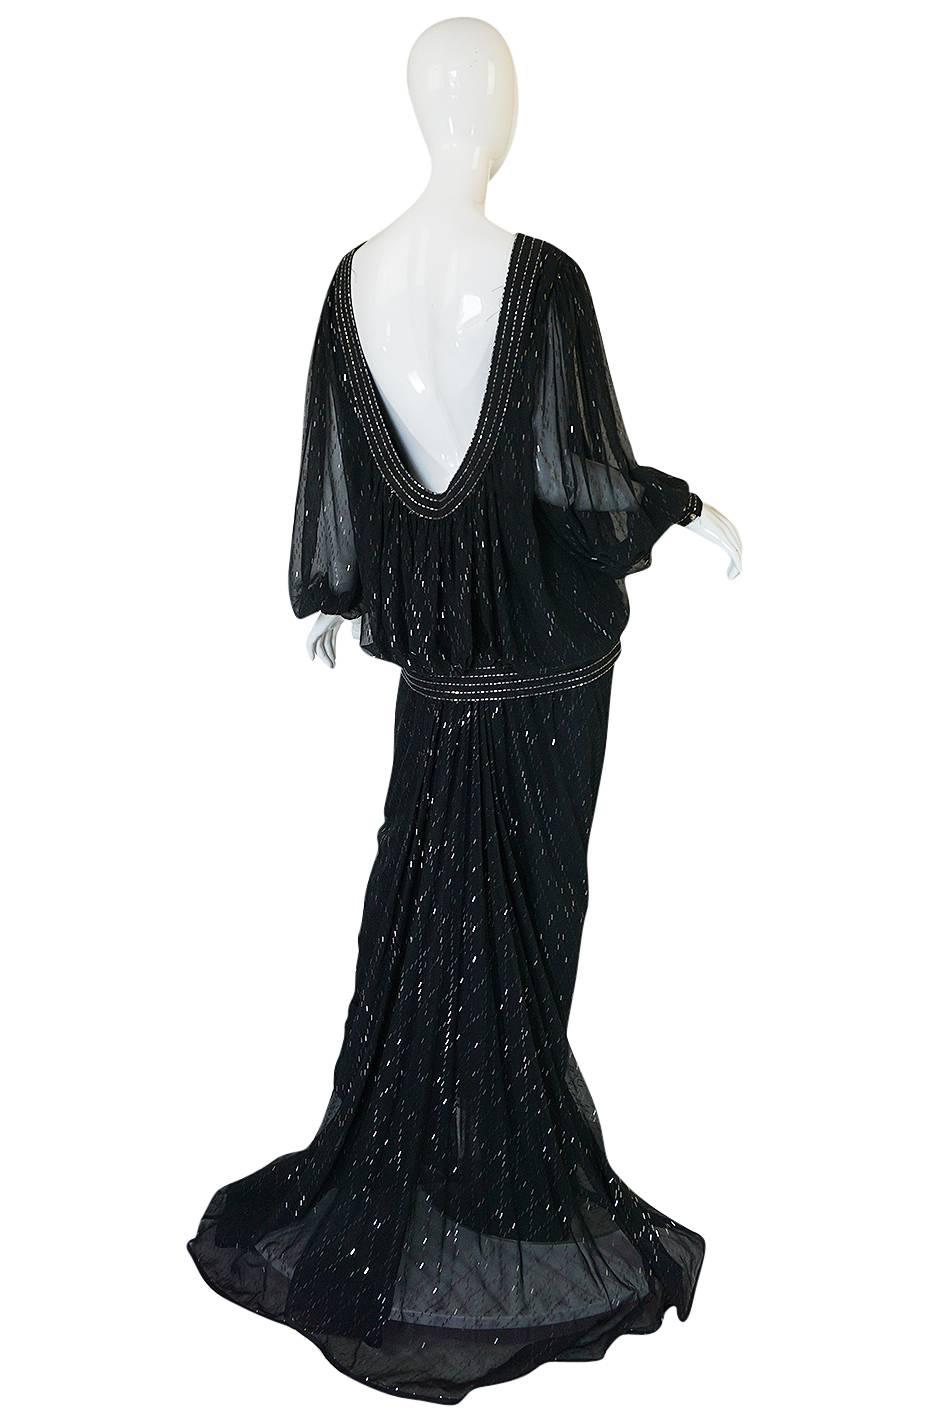 If you loved the volume and excess of the eighties this dress will make you fall in love. It is very unusual in many aspects but once on the body it really looks wonderful. It is made from a black chiffon that has little silver strips of foil